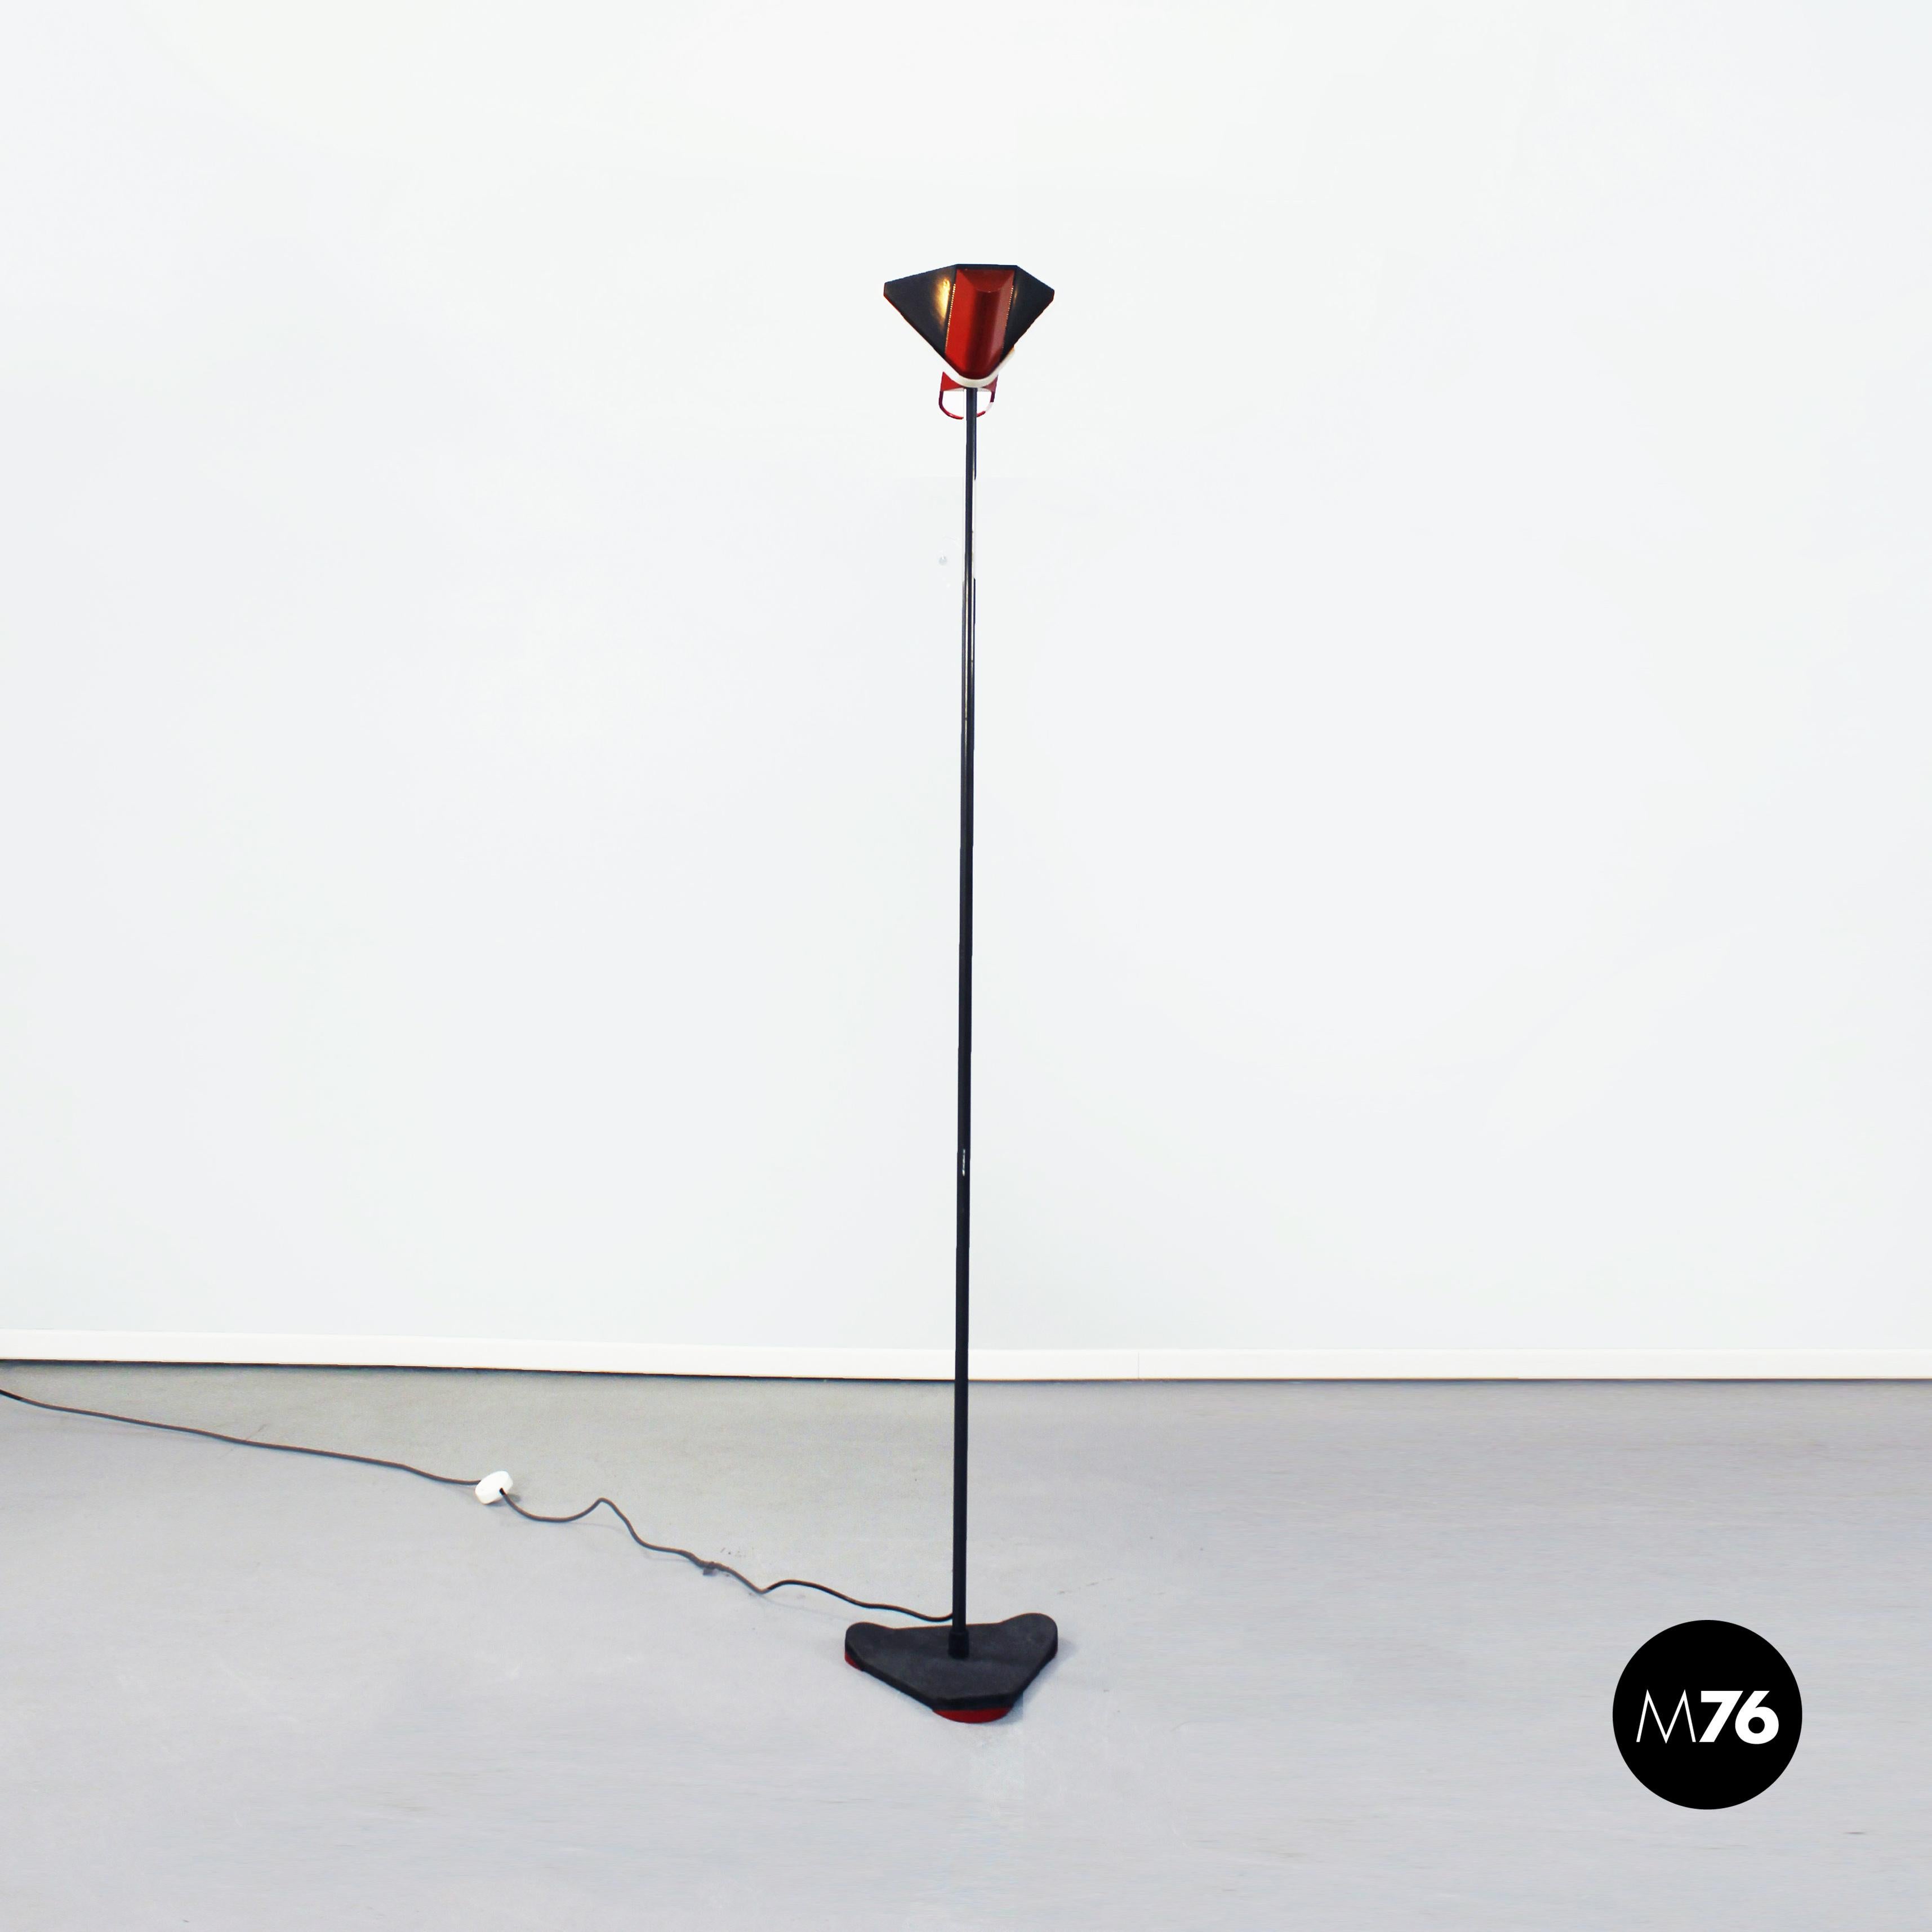 Italian Mid-Century Modern floor lamp by Arteluce, 1980s.
Floor lamp with structure and triangular base in black metal and pyramidal lampshade in black and red metal.

Produced by Arteluce in the 1980s.

Brand present.

Very good condition.